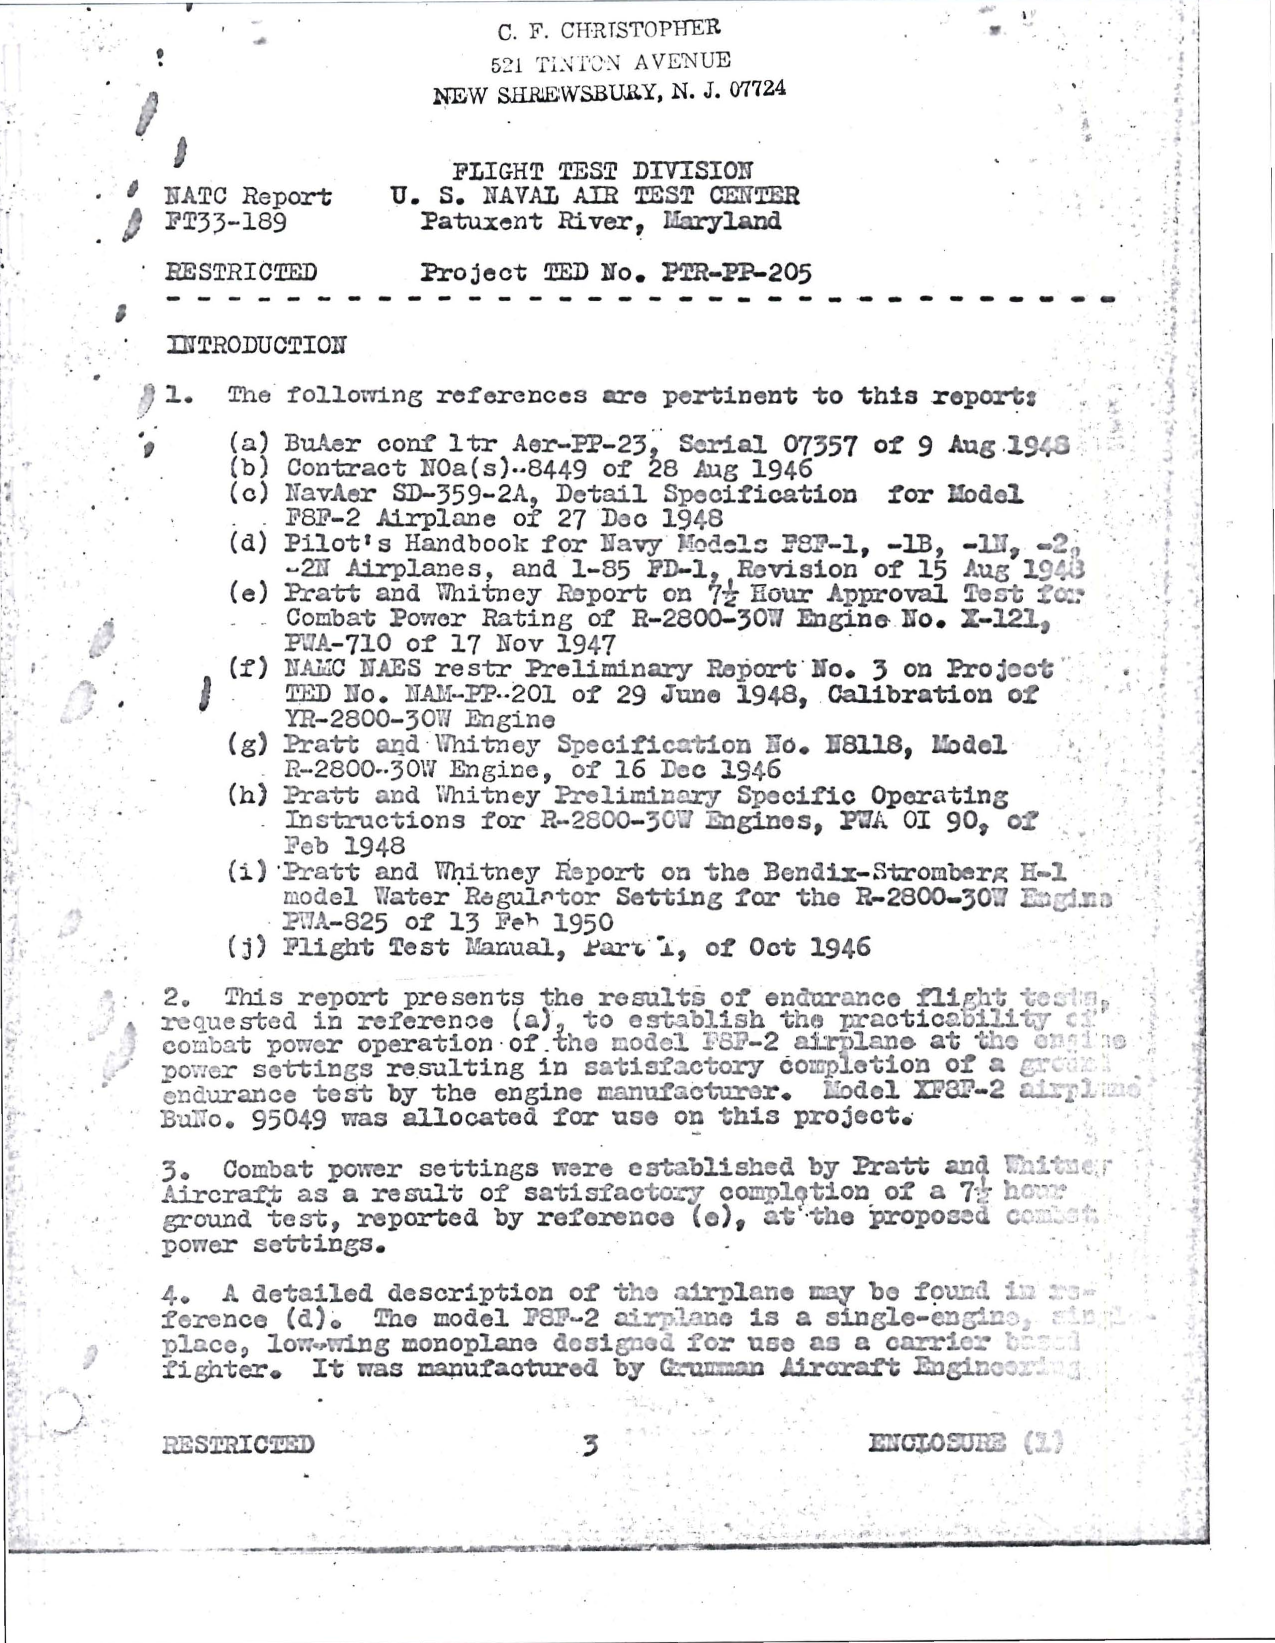 Sample page 5 from AirCorps Library document: Final Report on Combat Power Evaluation on F8F-2